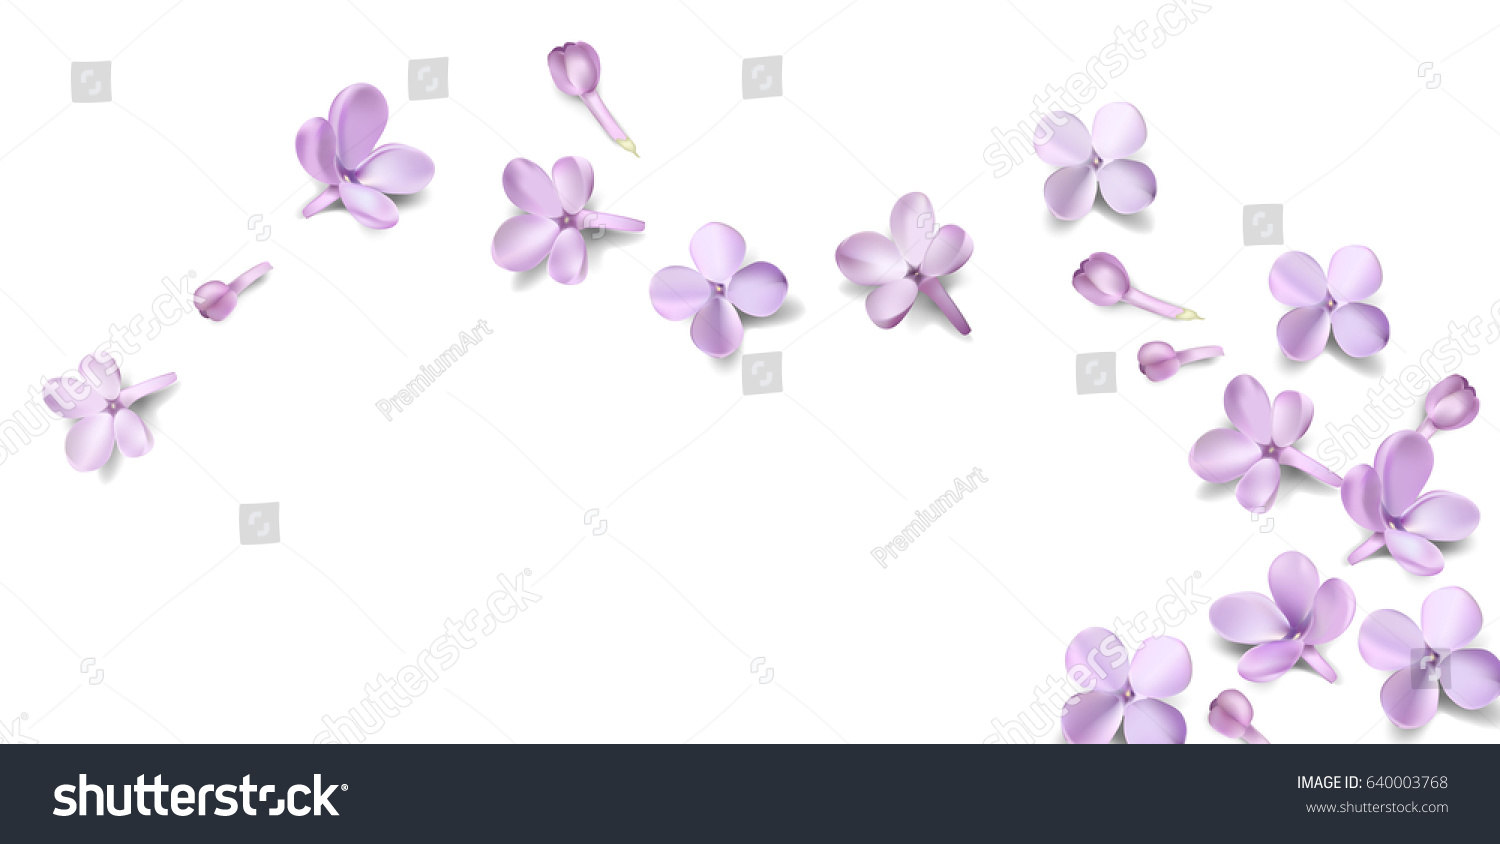 SVG of Soft pastel color floral background with place for text. Purple Lilac flowers and petals watercolor style vector illustration template svg